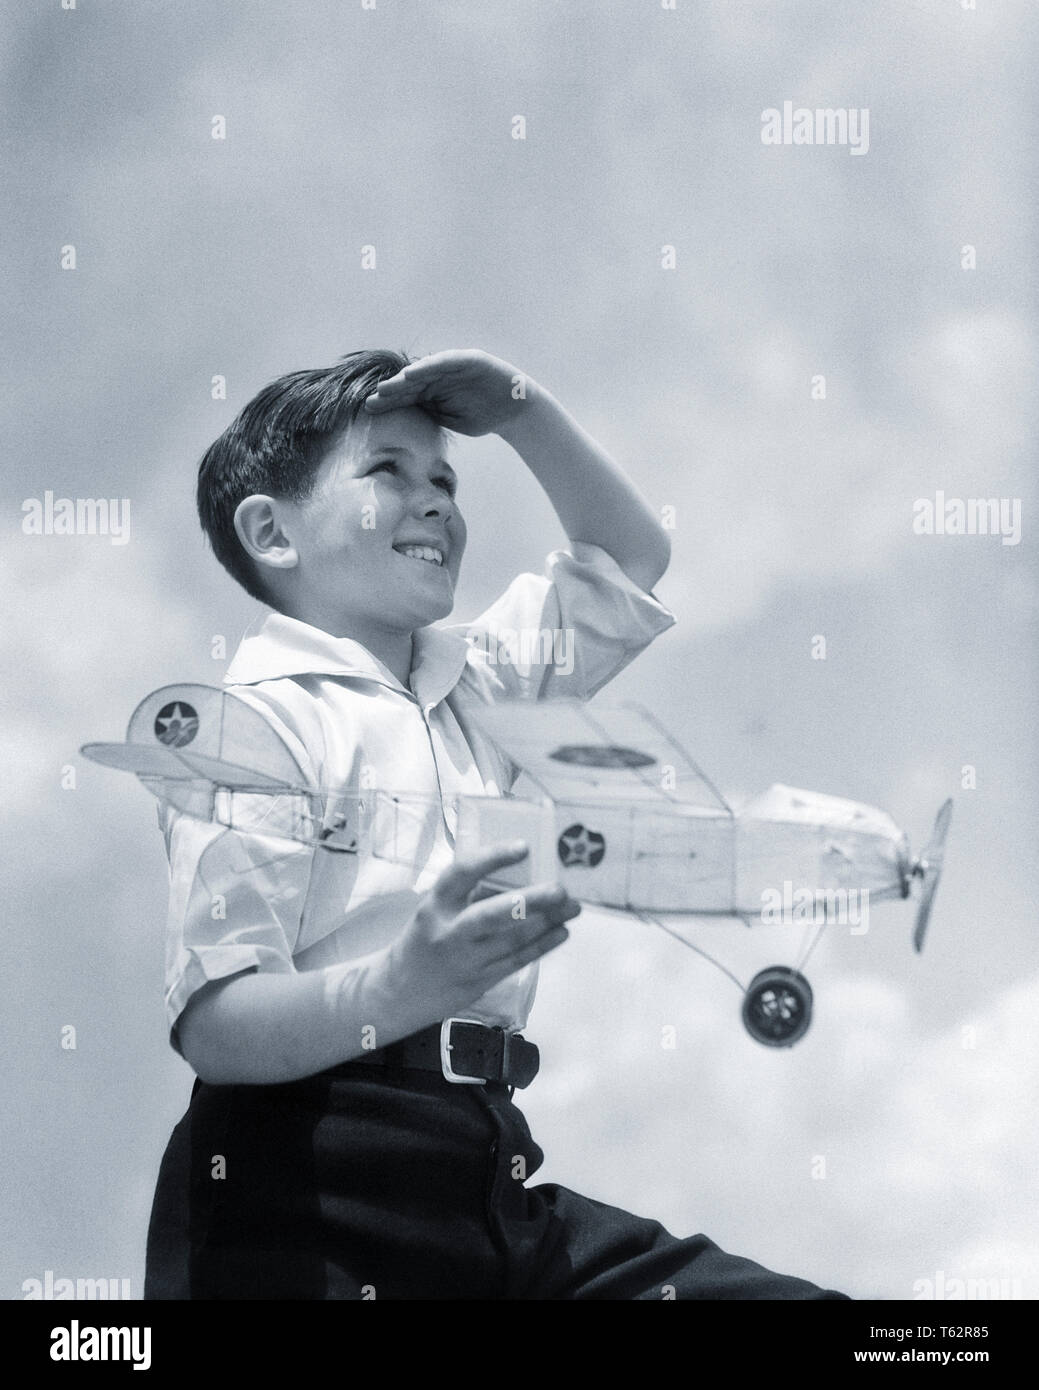 1930s SMILING YOUNG BOY SHADING EYES WITH HAND LOOKING SKYWARD HOLDING  RUBBER BAND WINDUP BALSA WOOD TISSUE PAPER MODEL AIRPLANE - b11981 HAR001  HARS PLANES FLIGHT RURAL COPY SPACE HALF-LENGTH INSPIRATION MALES